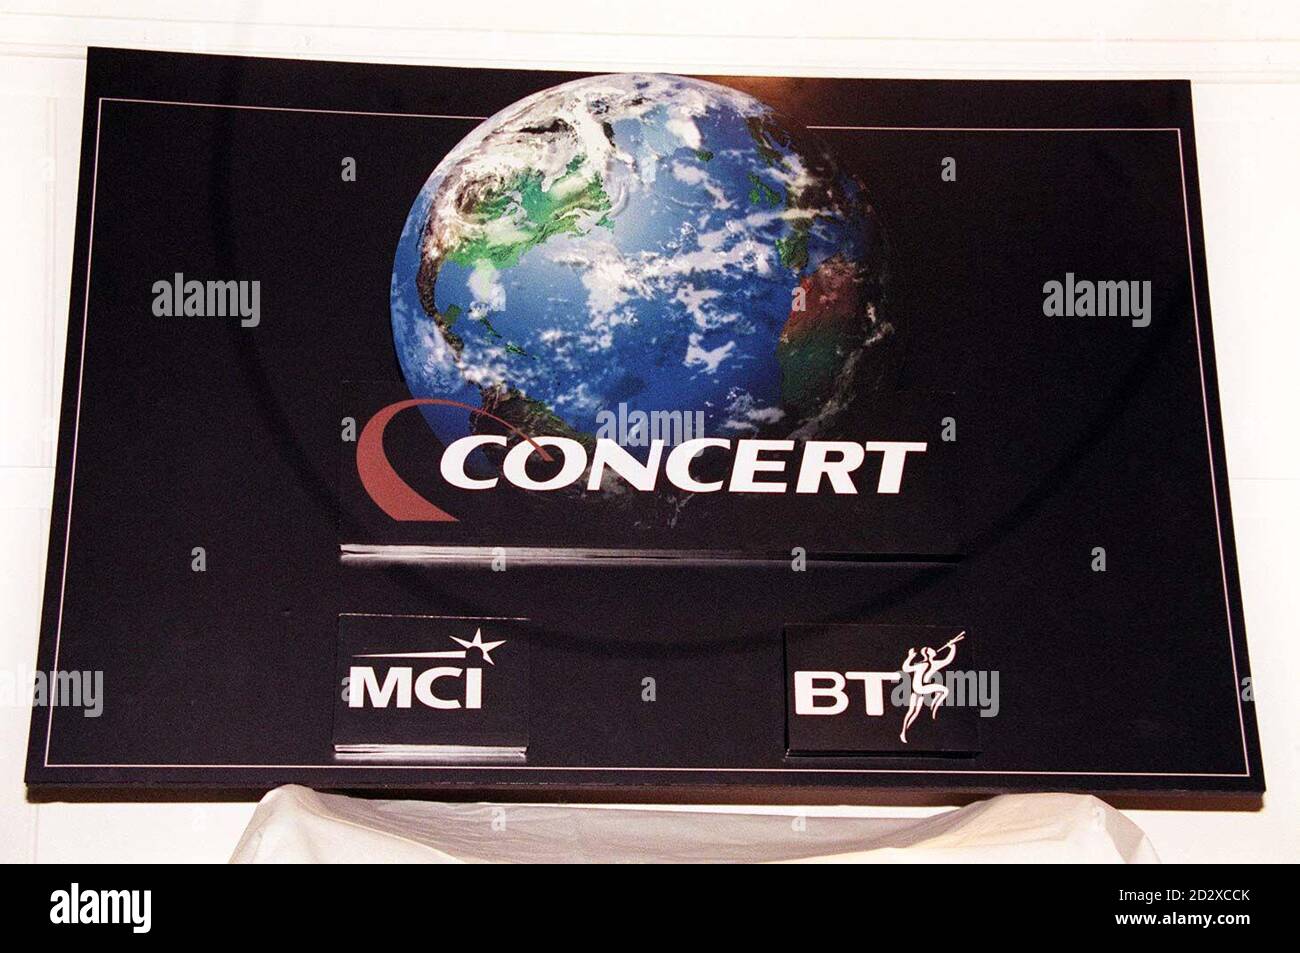 British Telecom and American telephones giant MCI today (SUN) confirmed  they had entered into a merger agreement. In a statement BT said the deal  would create a new company - Concert -